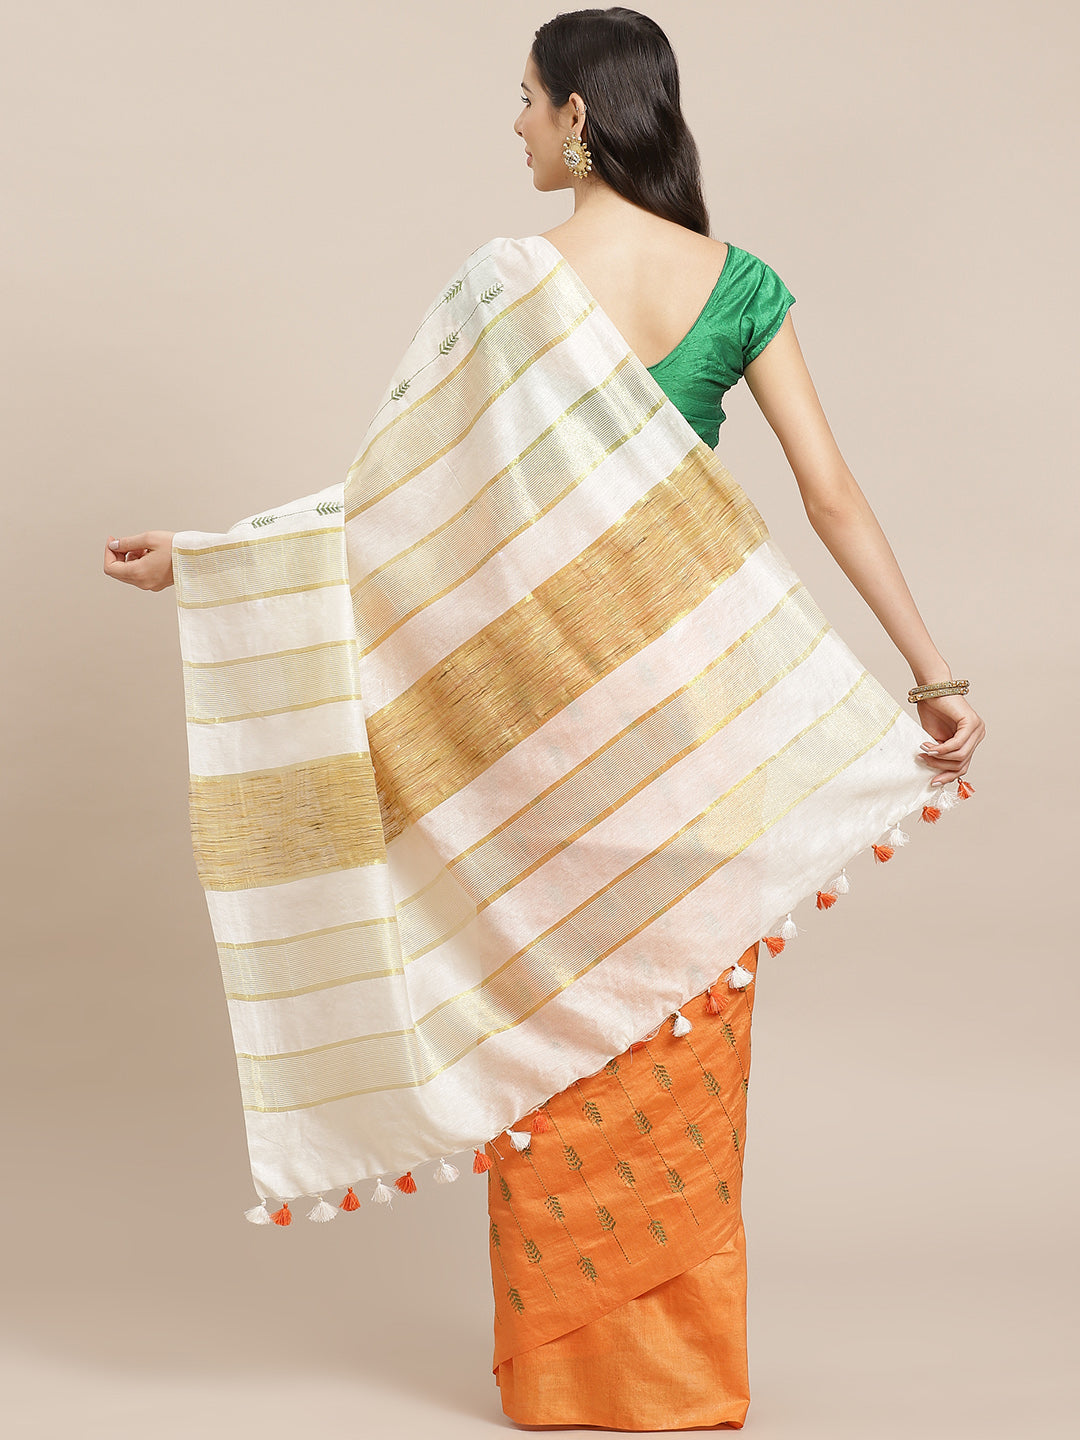 Off White and Gold, Kalakari India Bhagalpuri Silk Blend Woven Design Saree with Blouse ALBGSA0110-Saree-Kalakari India-ALBGSA0110-Bhagalpuri, Geographical Indication, Hand Crafted, Heritage Prints, Jute, Natural Dyes, Red, Sarees, Silk Blend, Sustainable Fabrics, Woven, Yellow-[Linen,Ethnic,wear,Fashionista,Handloom,Handicraft,Indigo,blockprint,block,print,Cotton,Chanderi,Blue, latest,classy,party,bollywood,trendy,summer,style,traditional,formal,elegant,unique,style,hand,block,print, dabu,booti